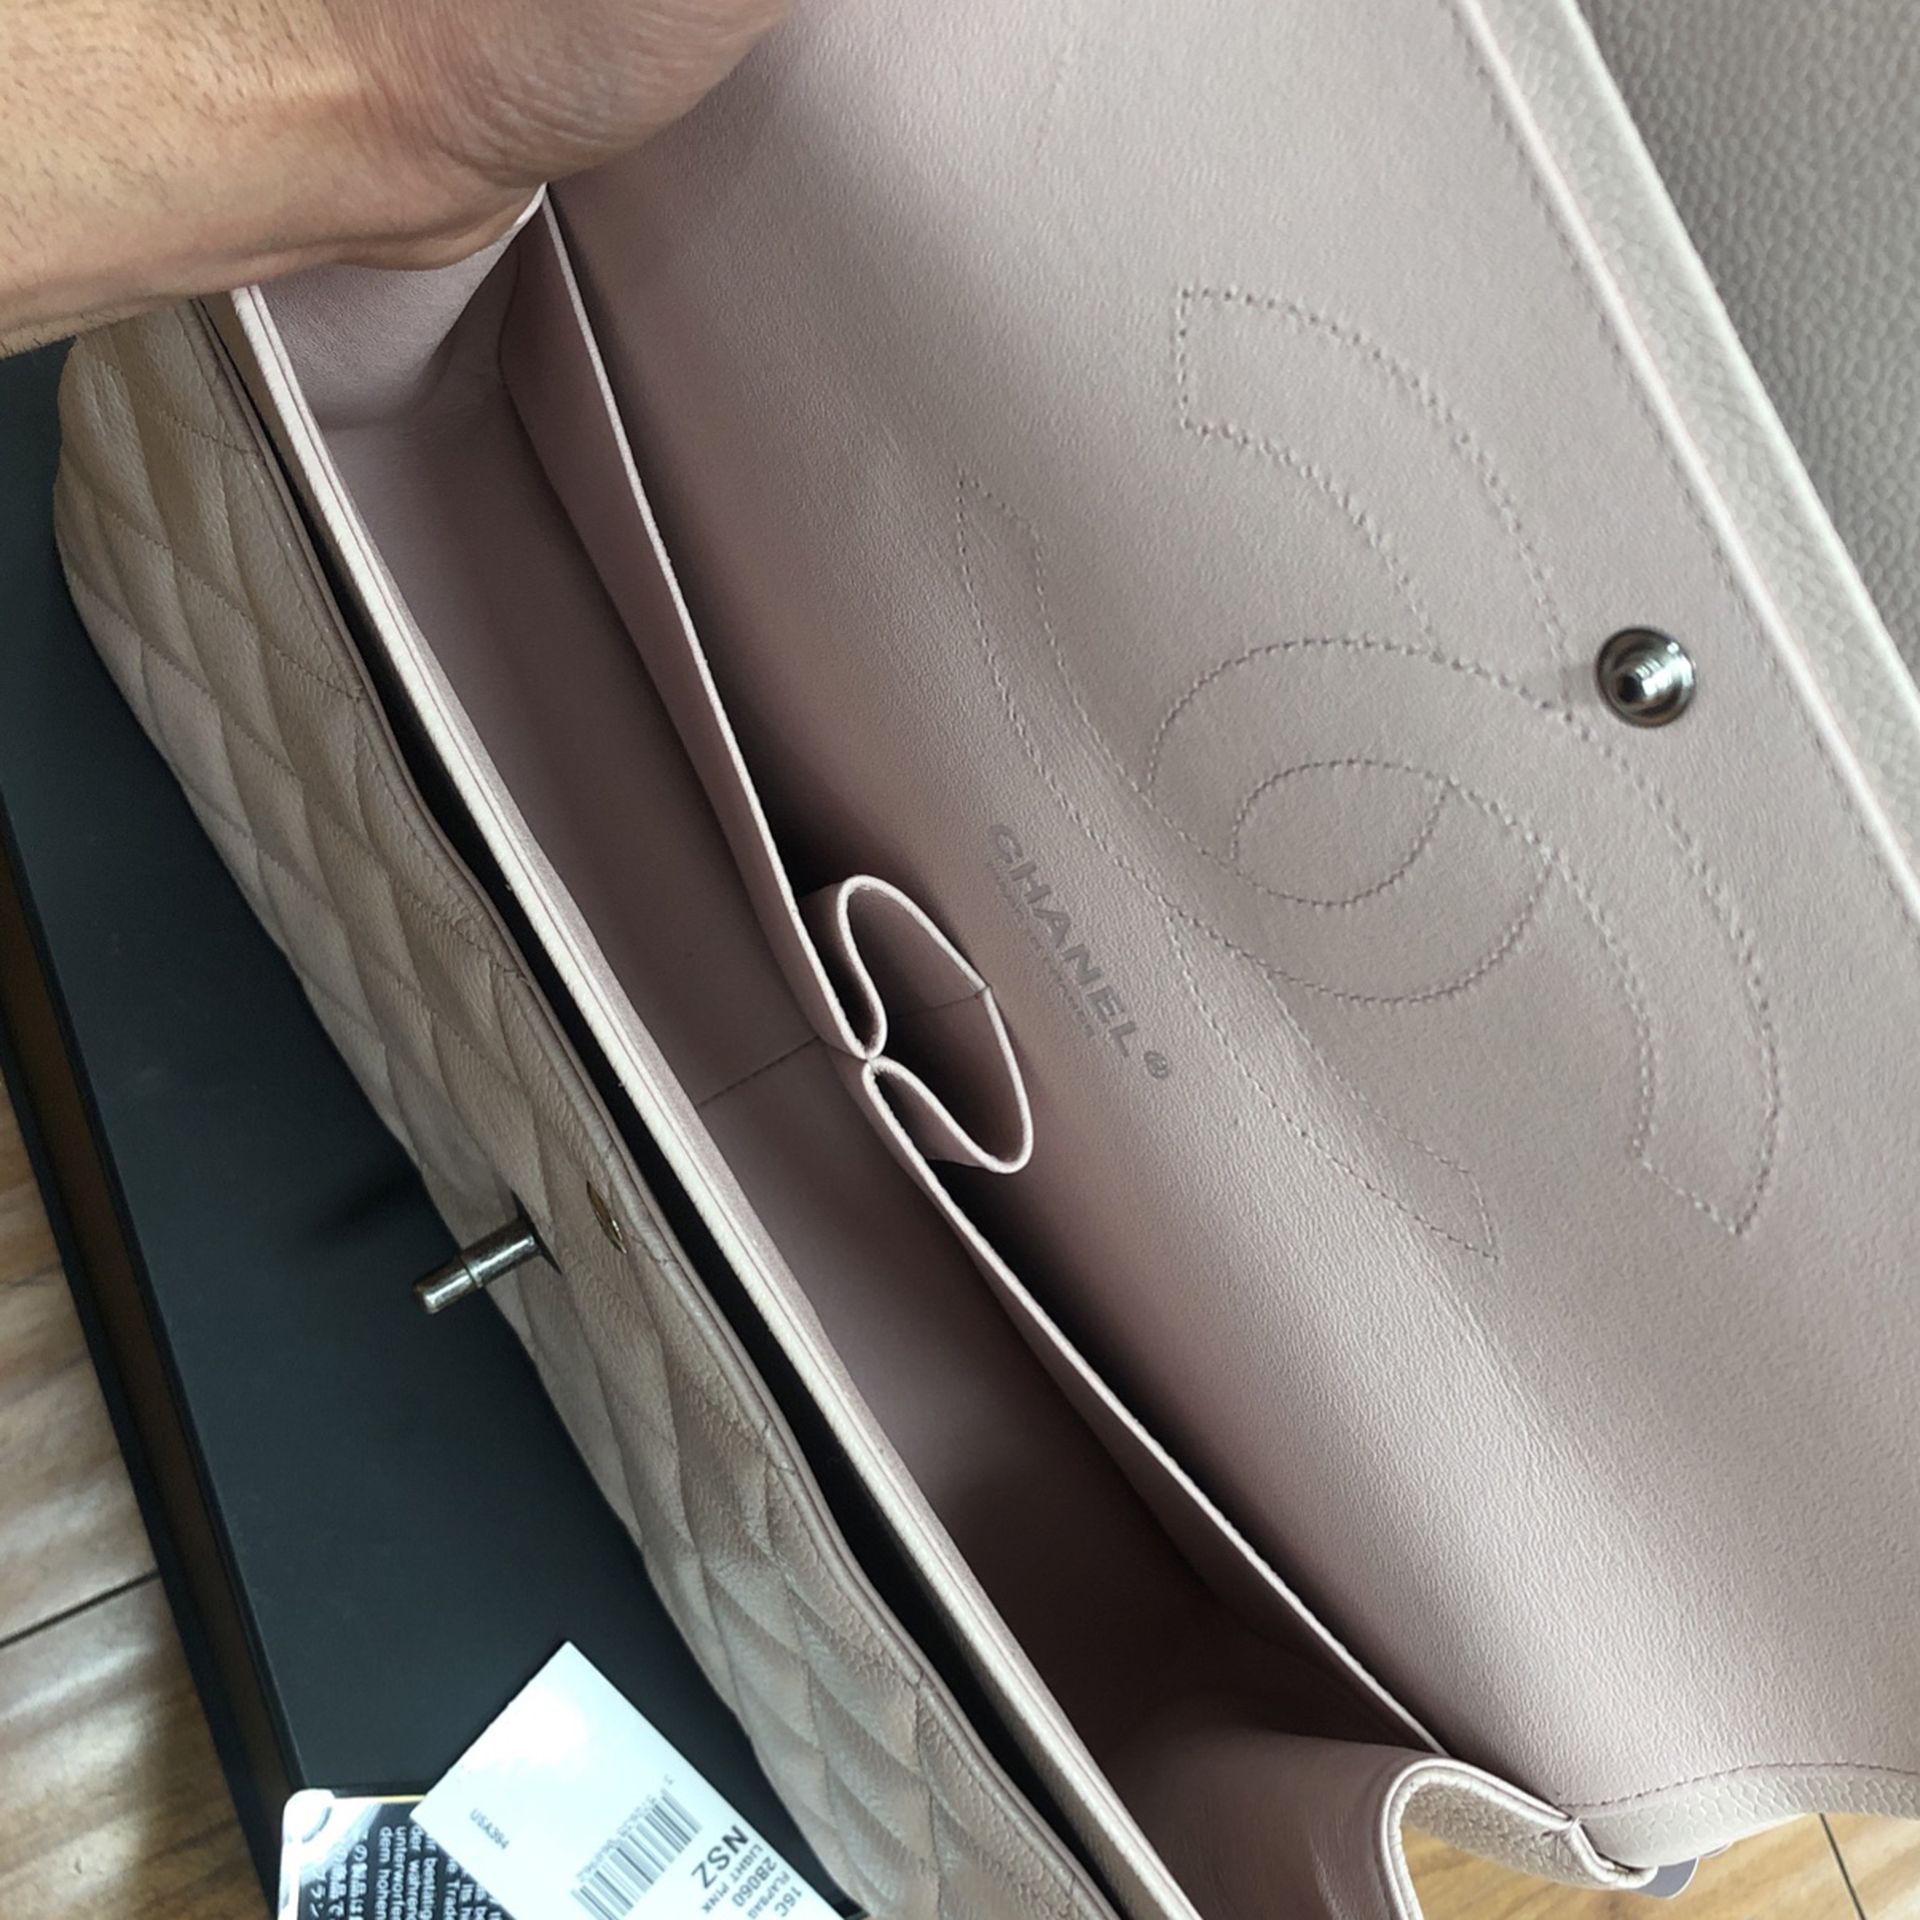 Chanel Flap Bag for Sale in San Jose, CA - OfferUp